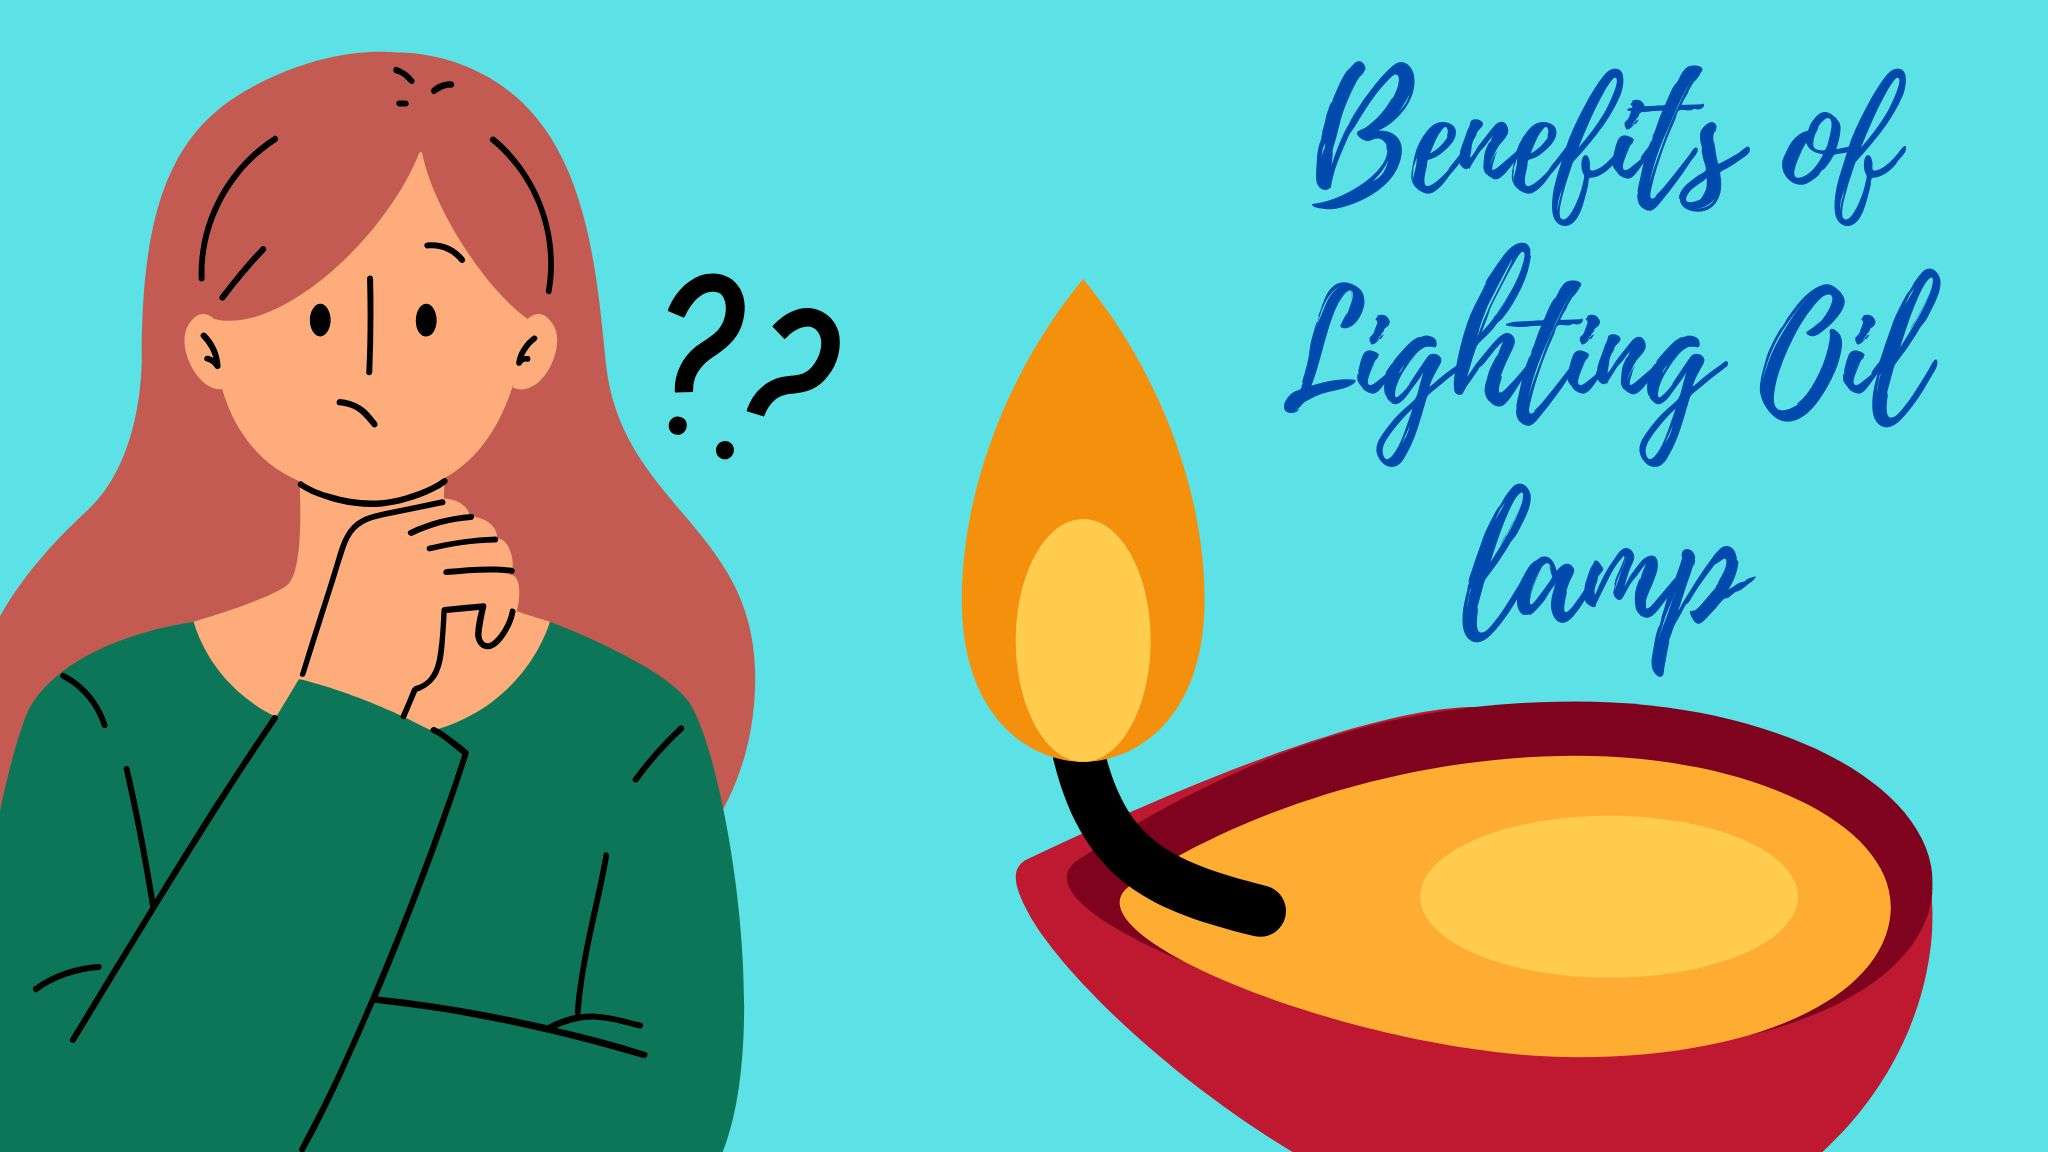 Benefits of Lighting Oil Lamp As a married woman